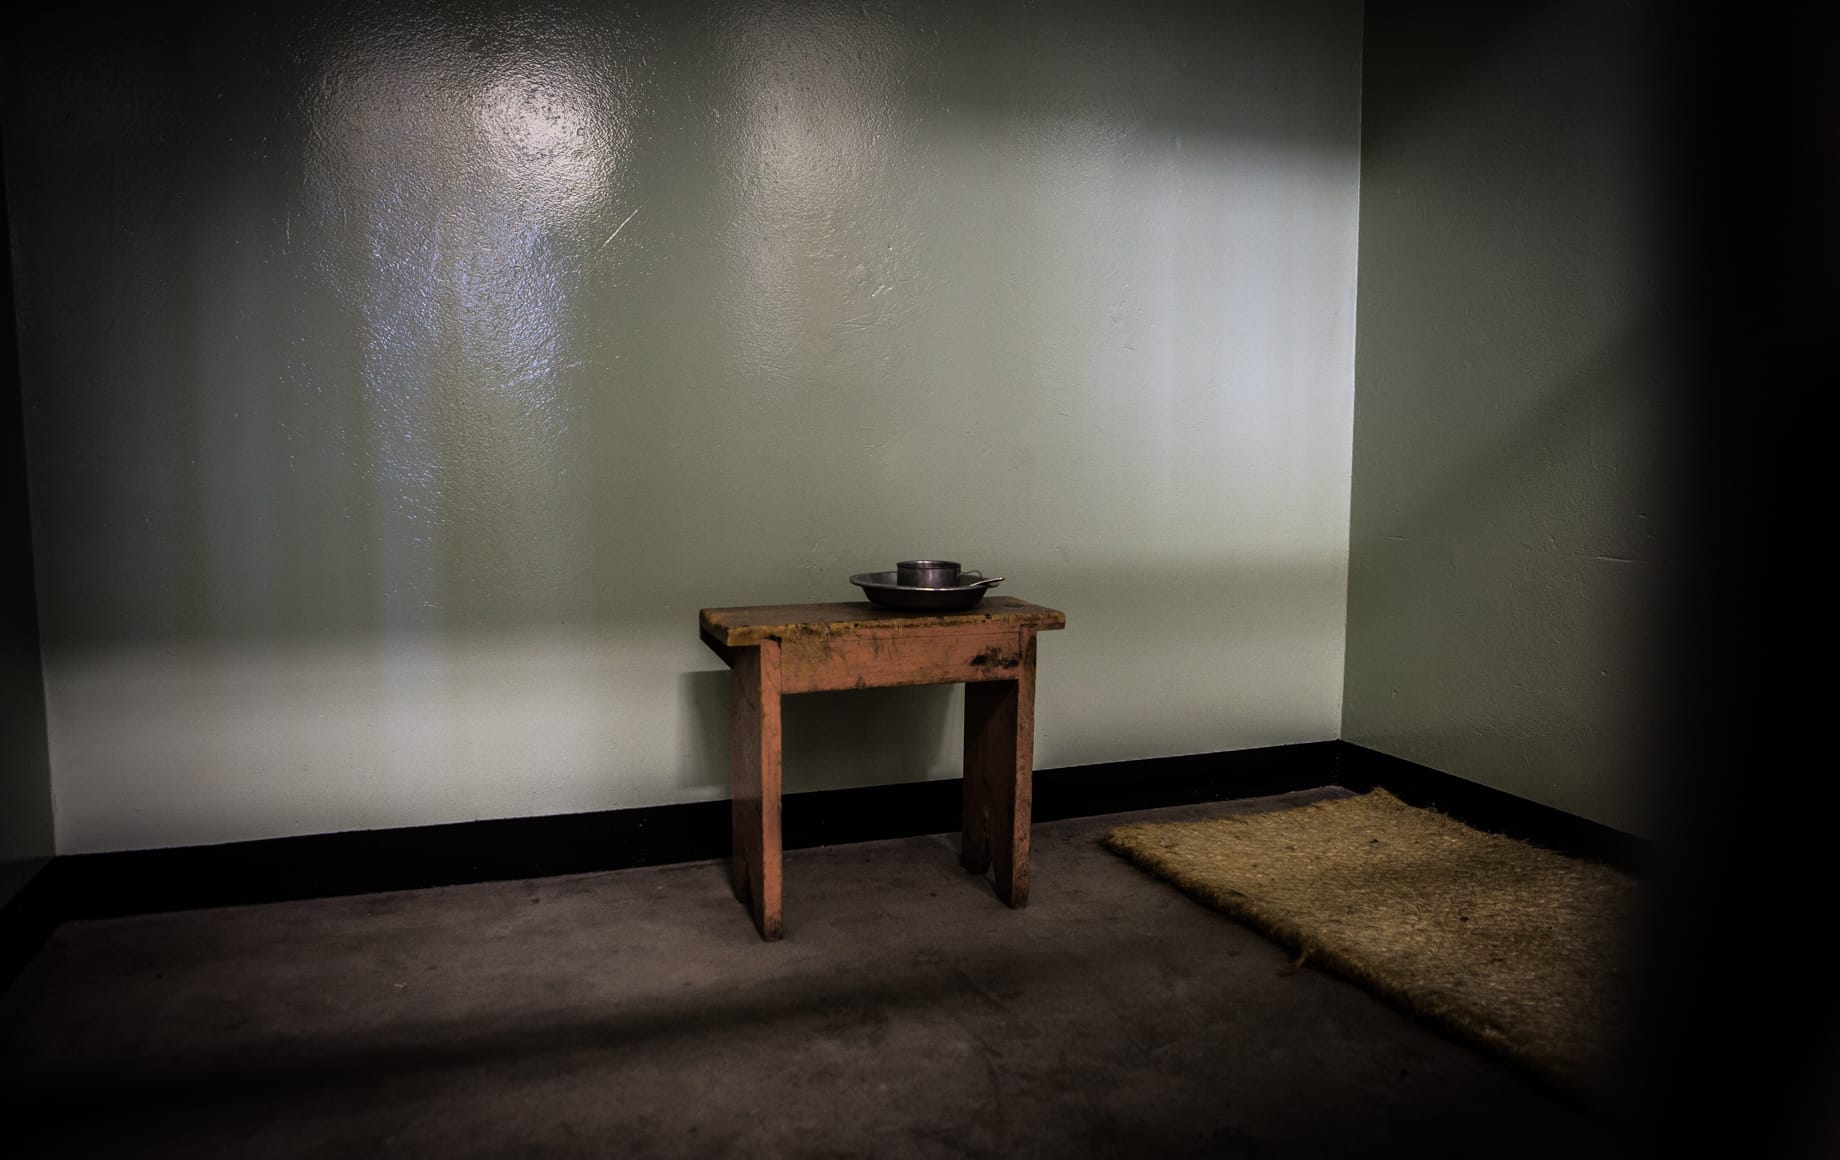 A Visit to Robben Island, the Brutal Prison that Held Mandela, Is Haunting and Inspiring